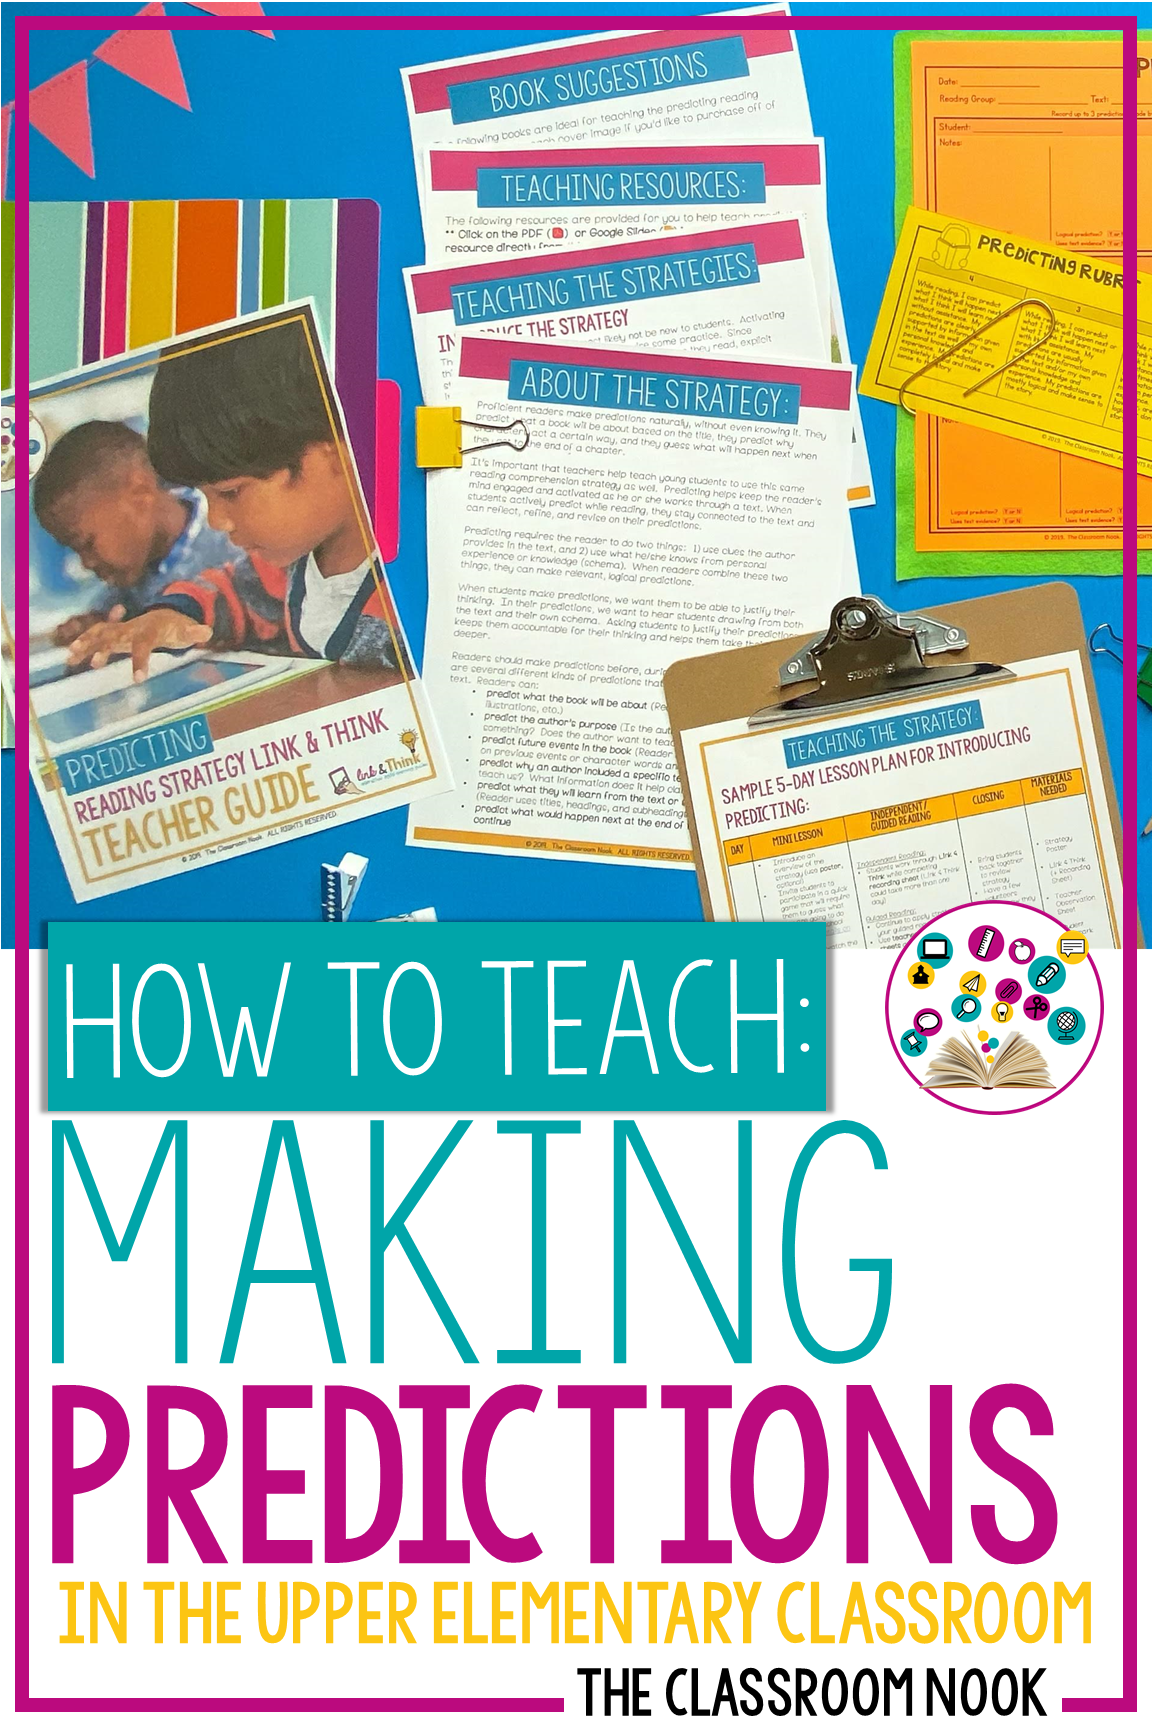 Reading Comprehension Strategy Series: How To Teach Students to